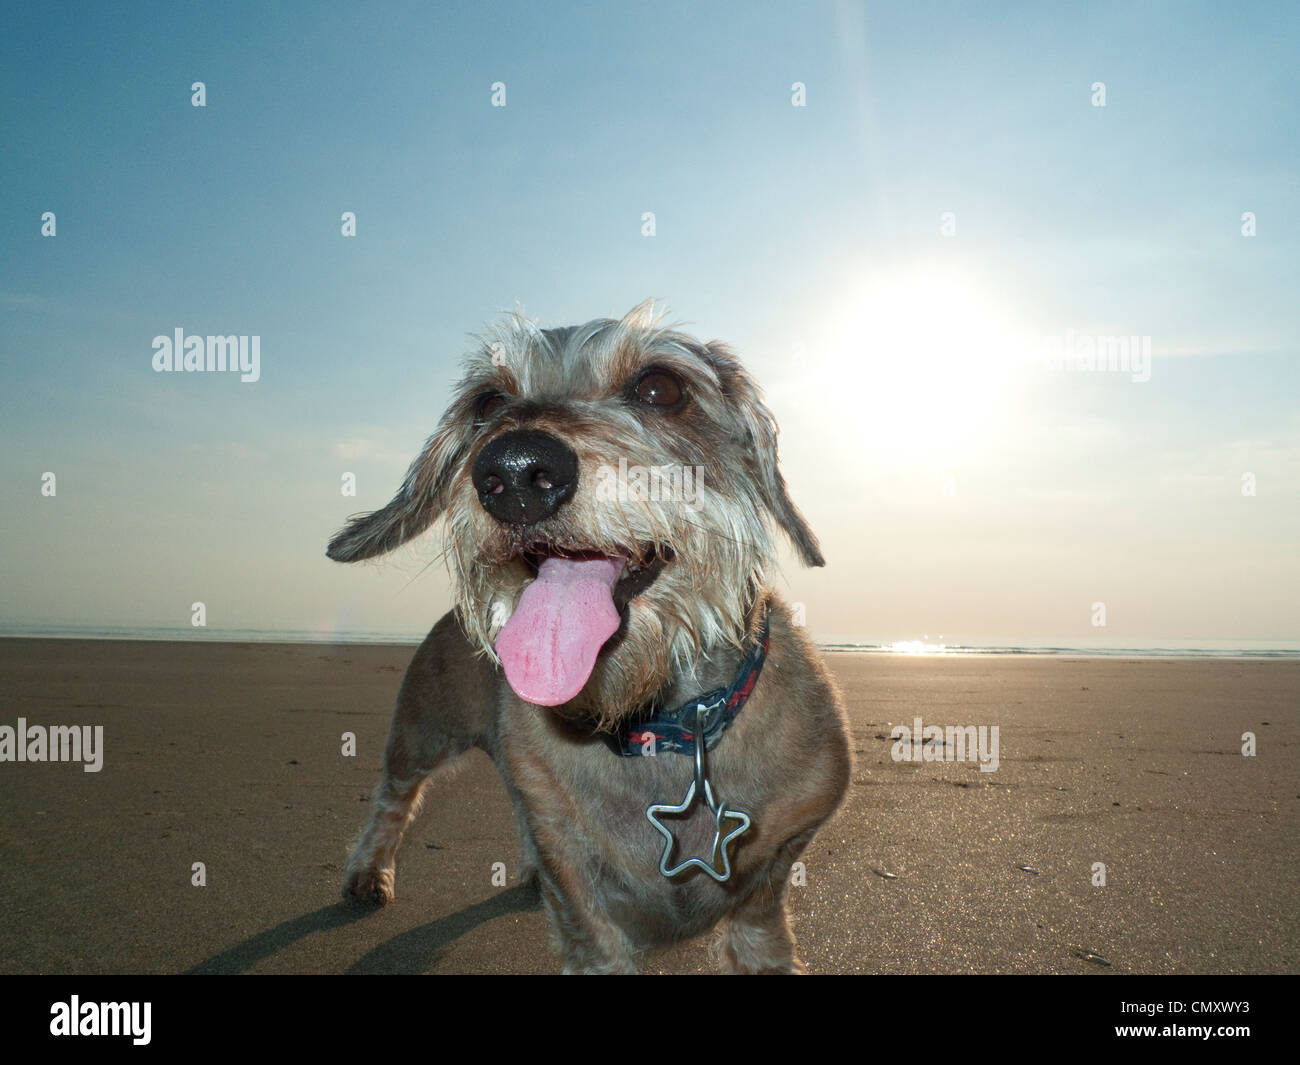 A Dachshund on a hot sunny day at the beach. Stock Photo